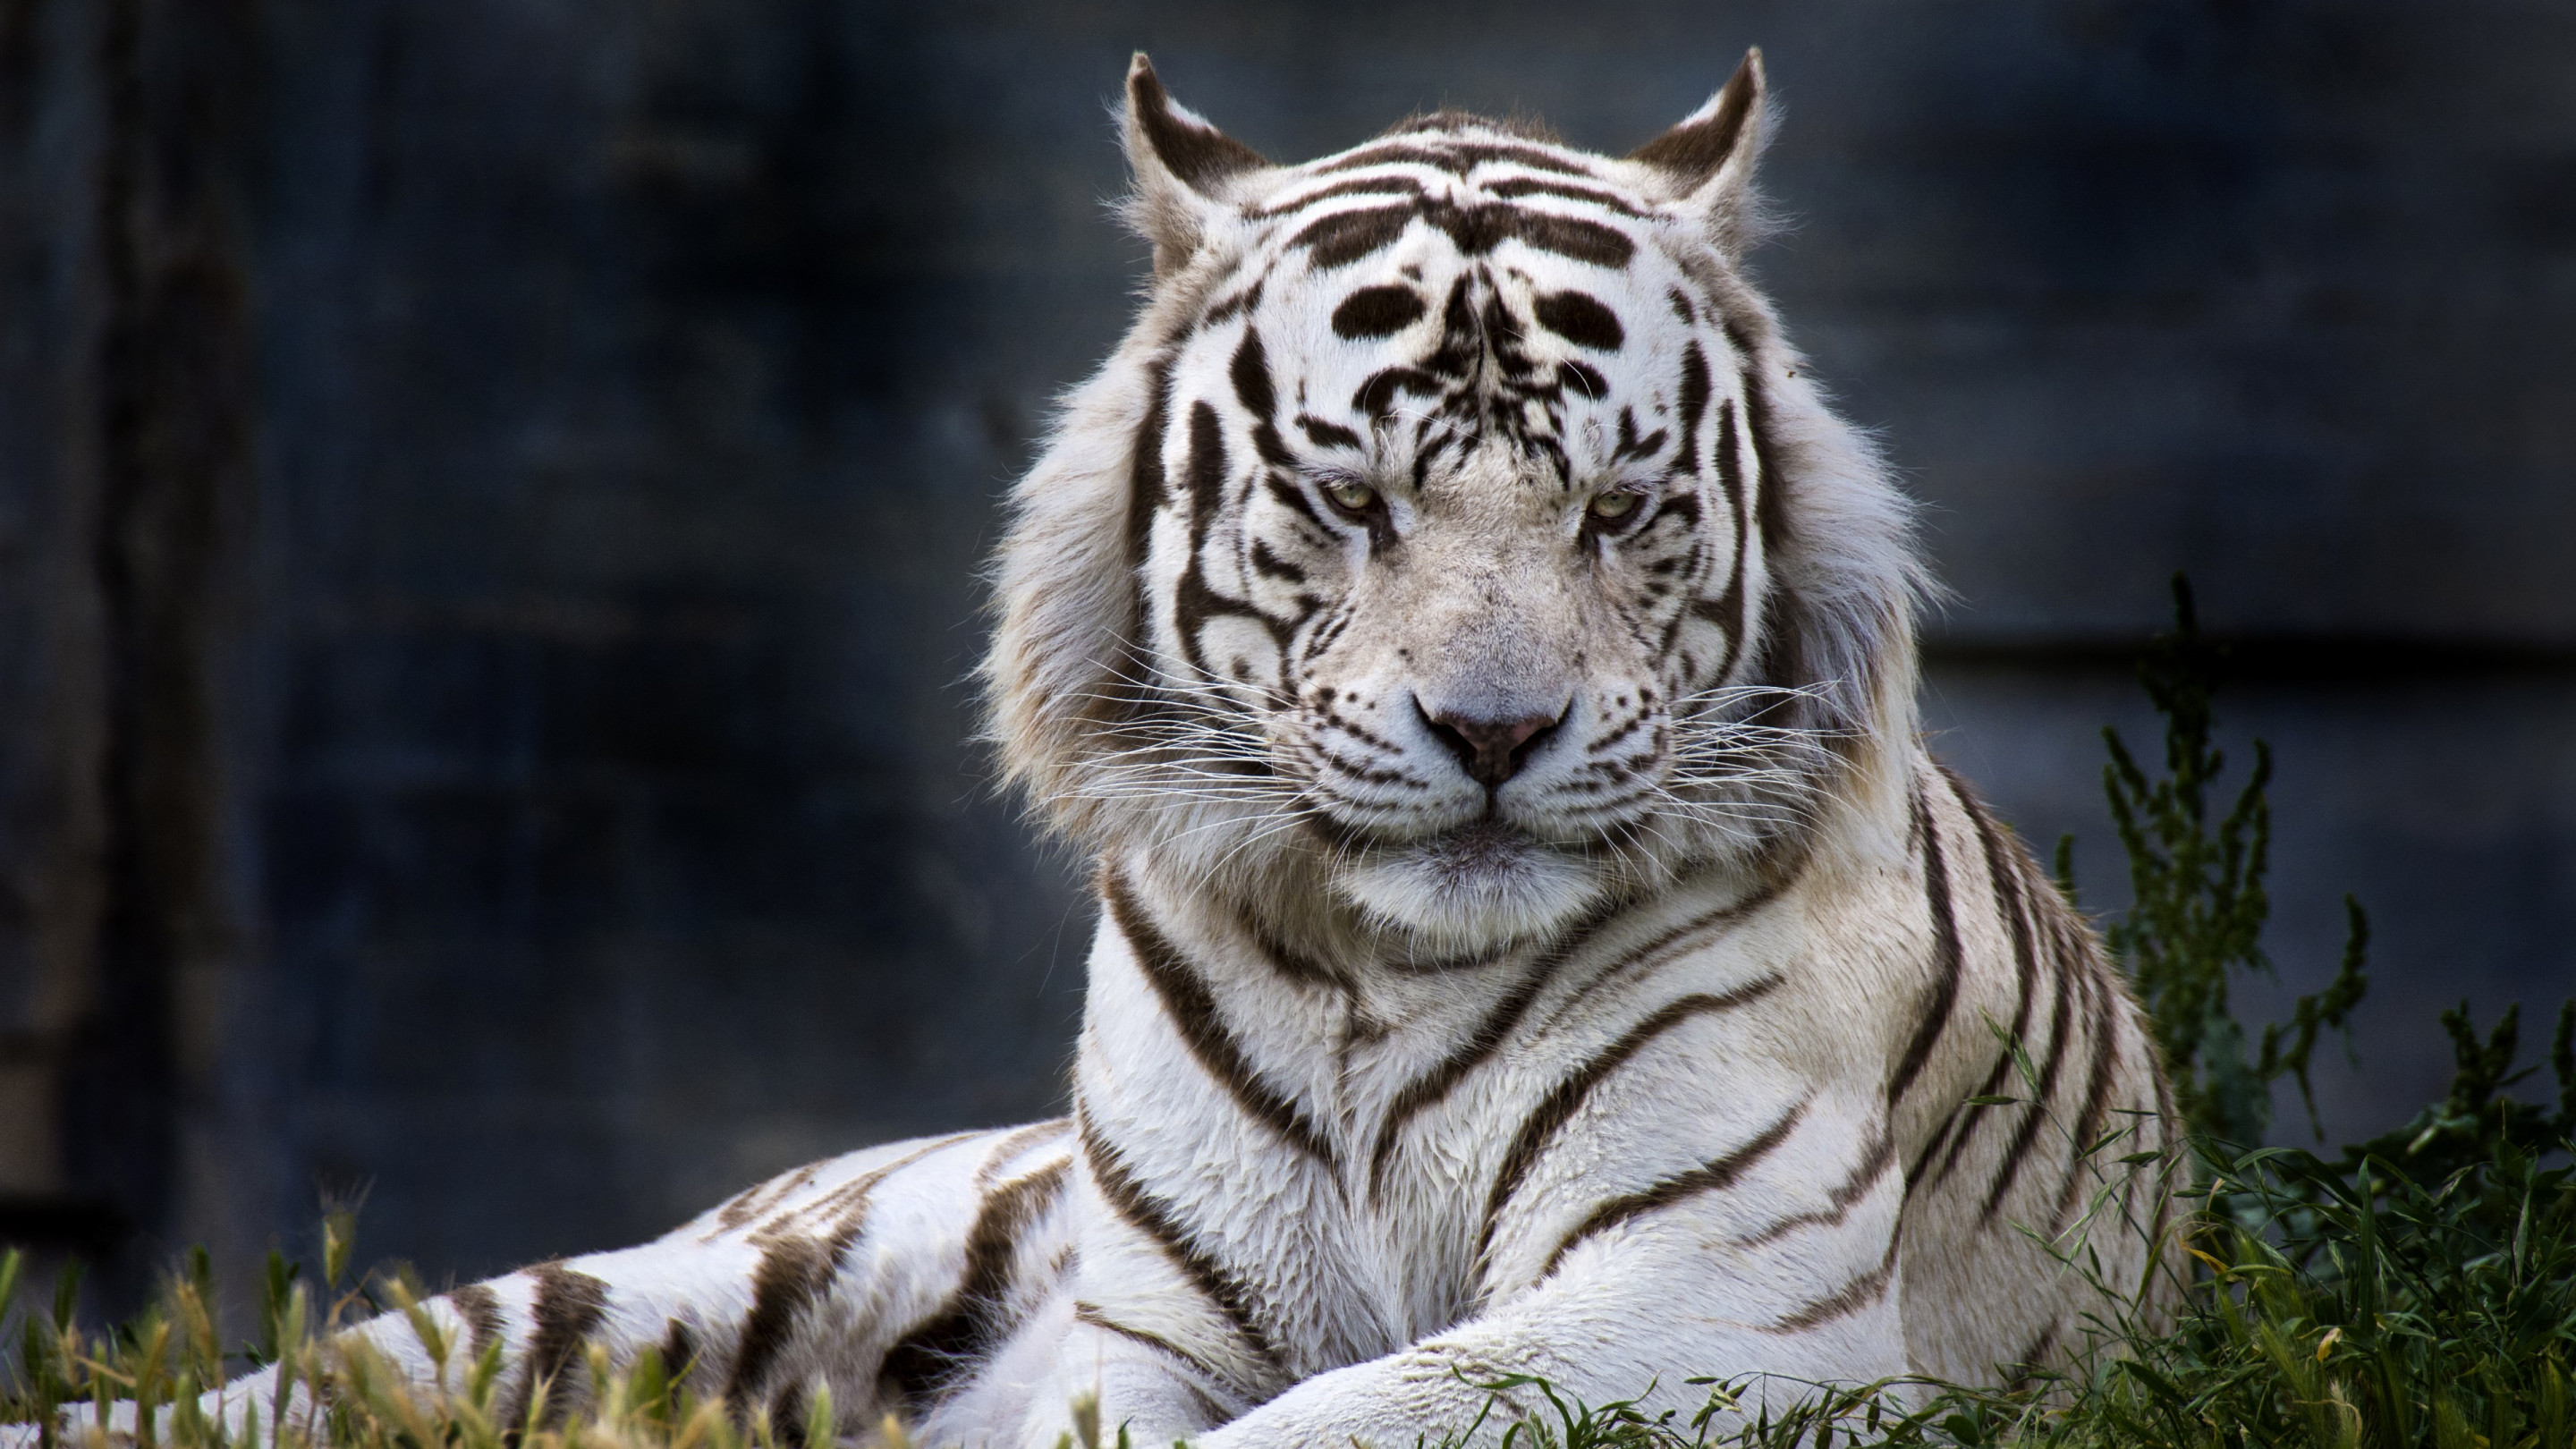 The white tiger from Madrid Zoo wallpaper 2880x1620